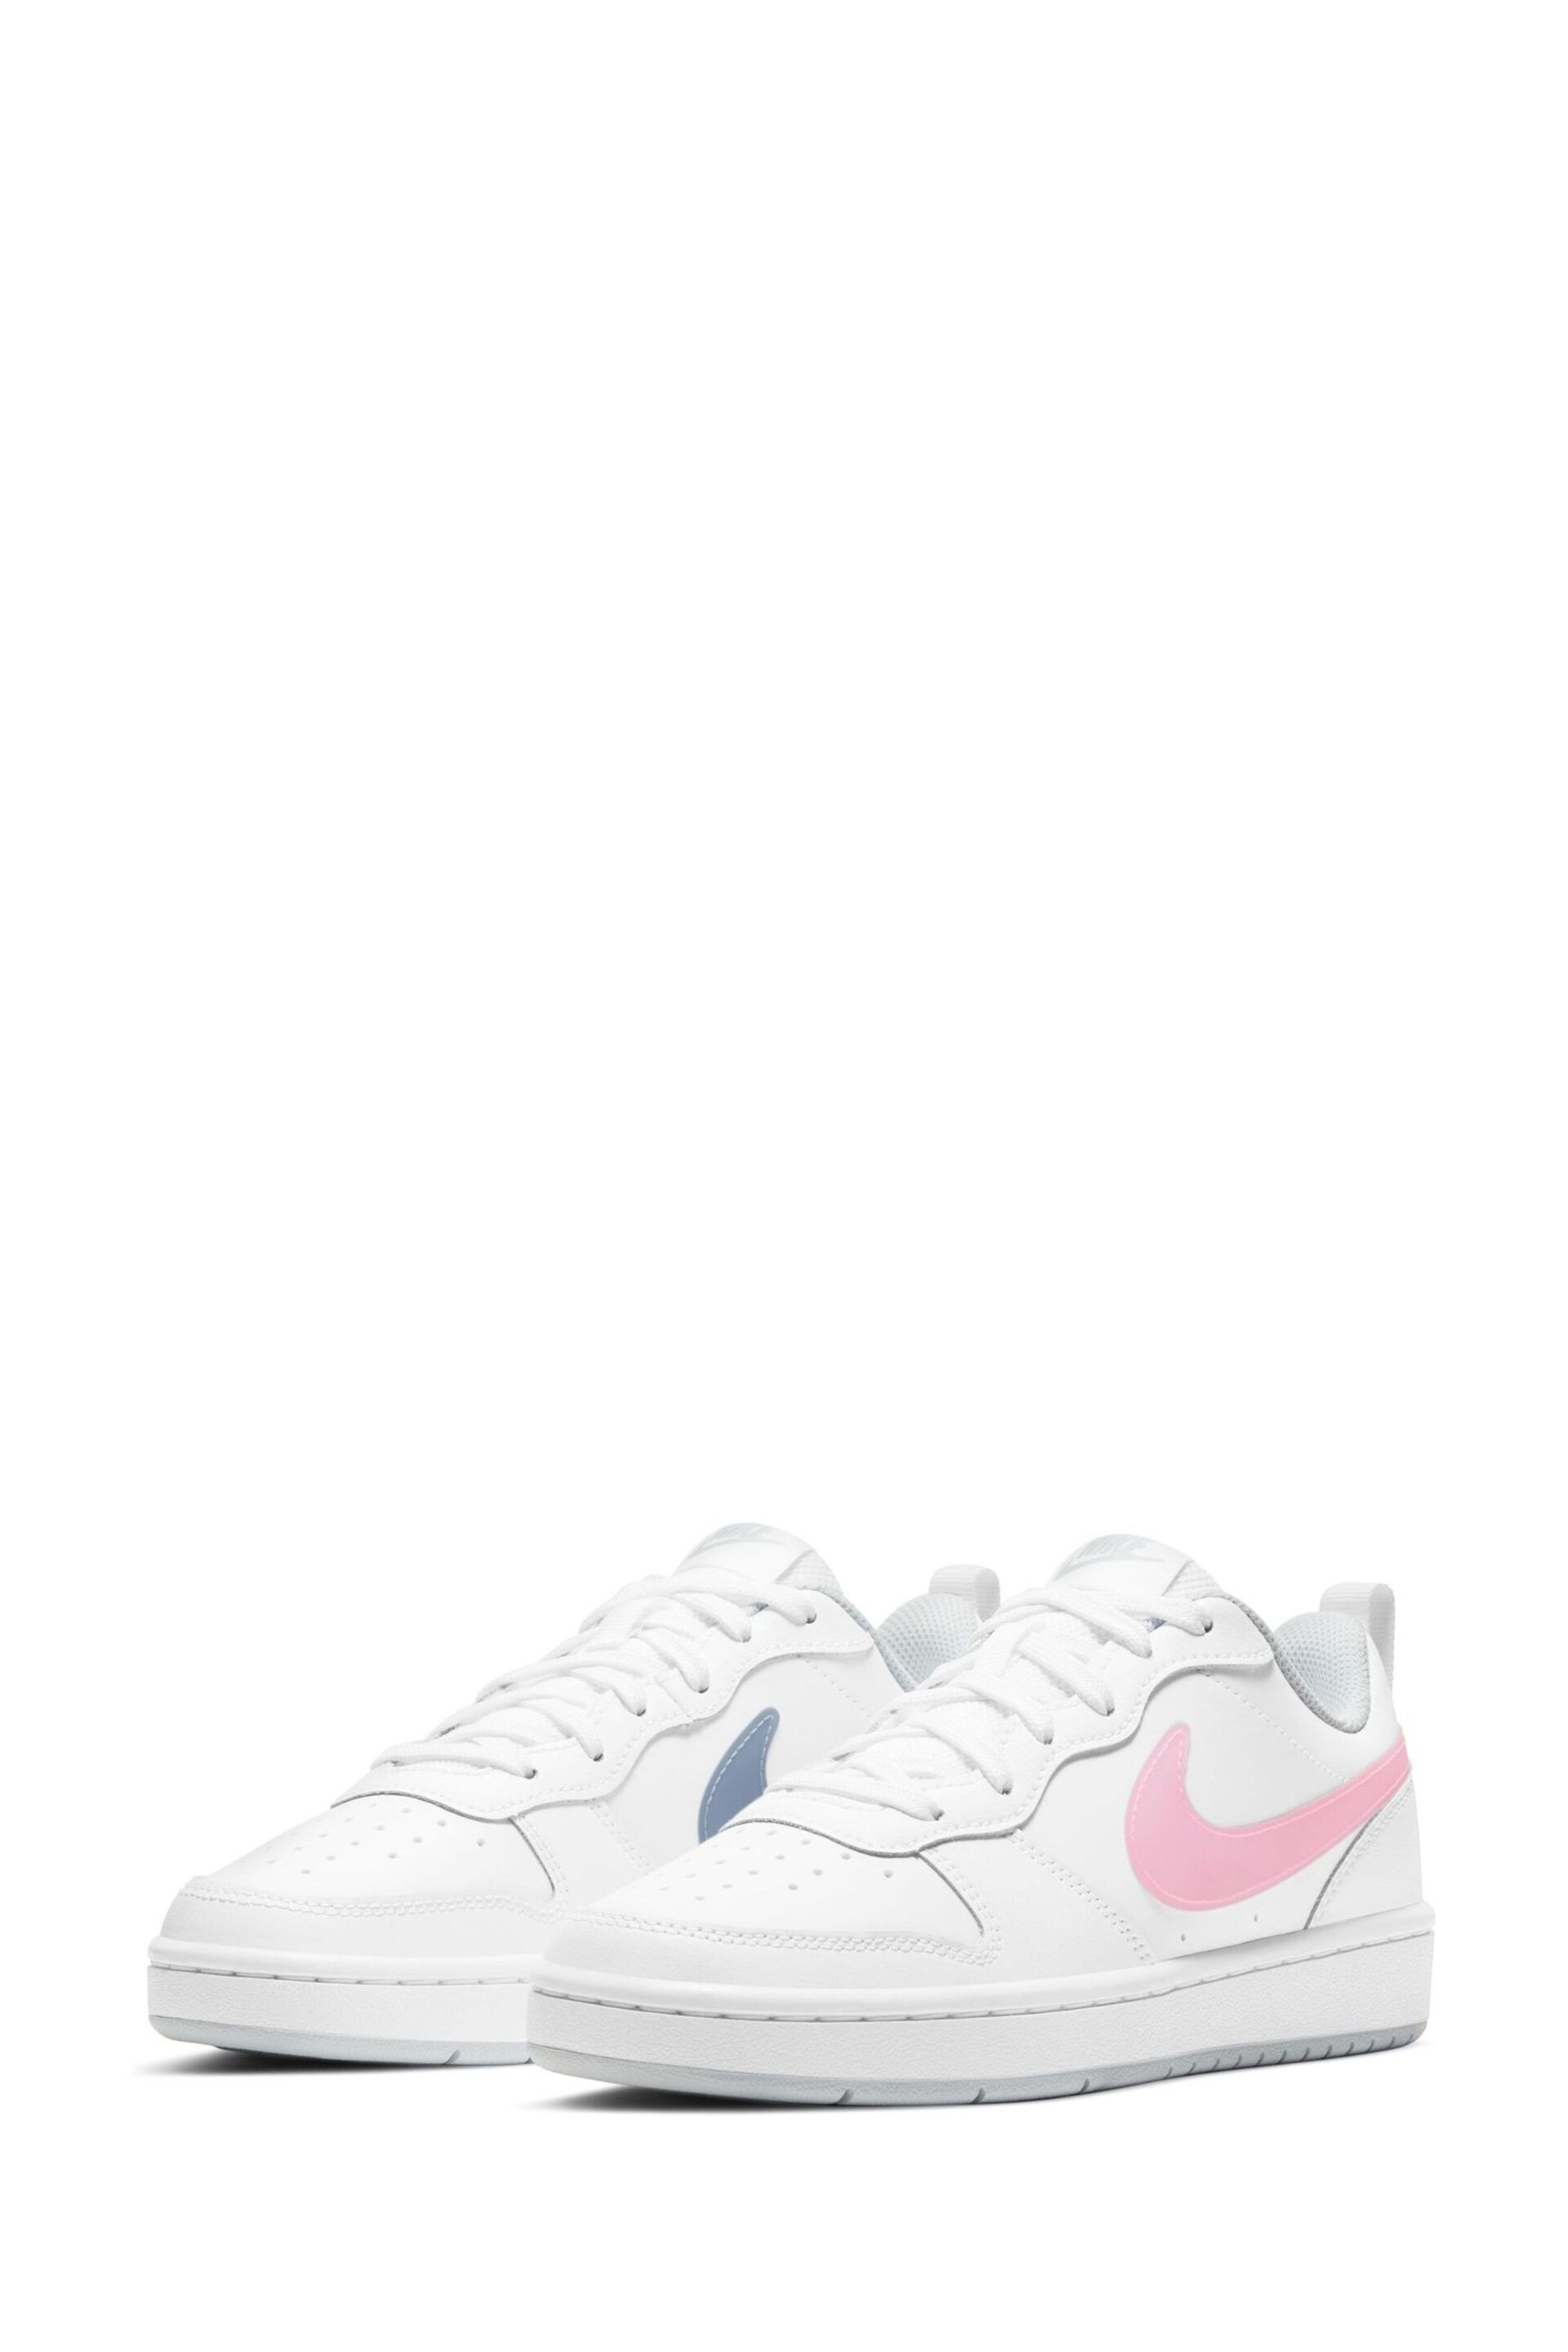 Nike White/Pink Court Borough Low Youth Trainers - Image 3 of 8